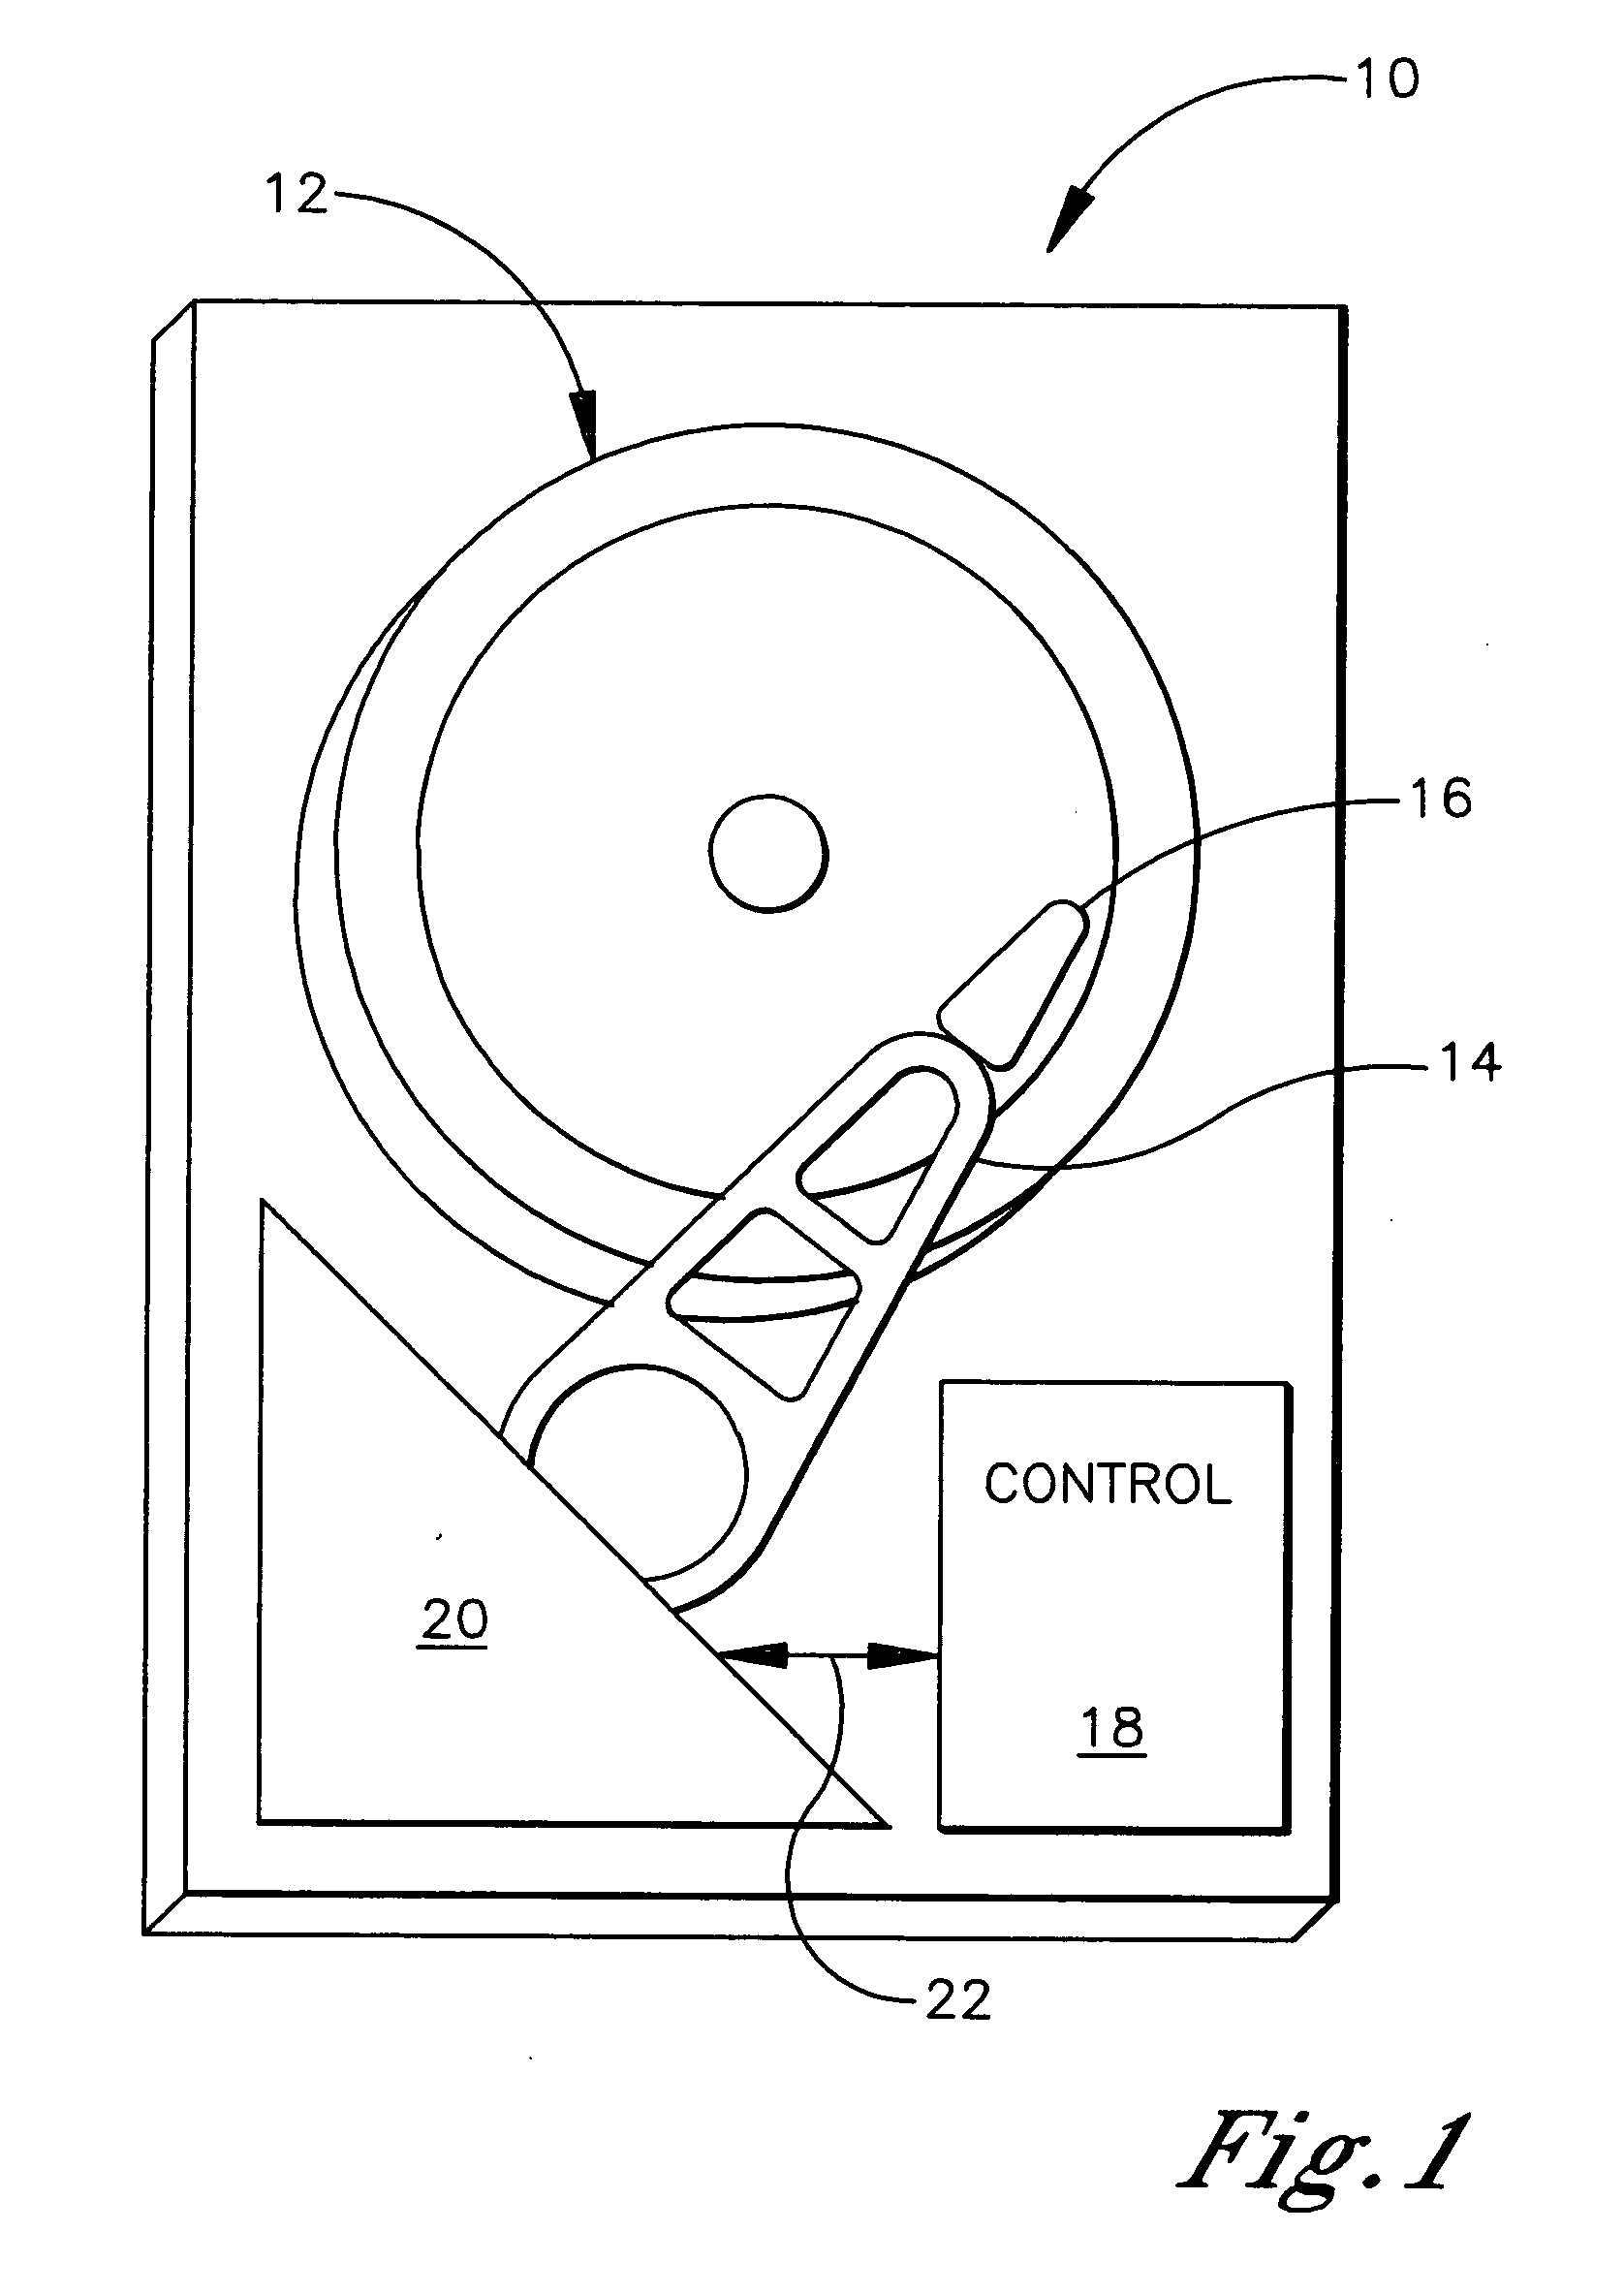 System and method for generating disk failure warning using read back signal